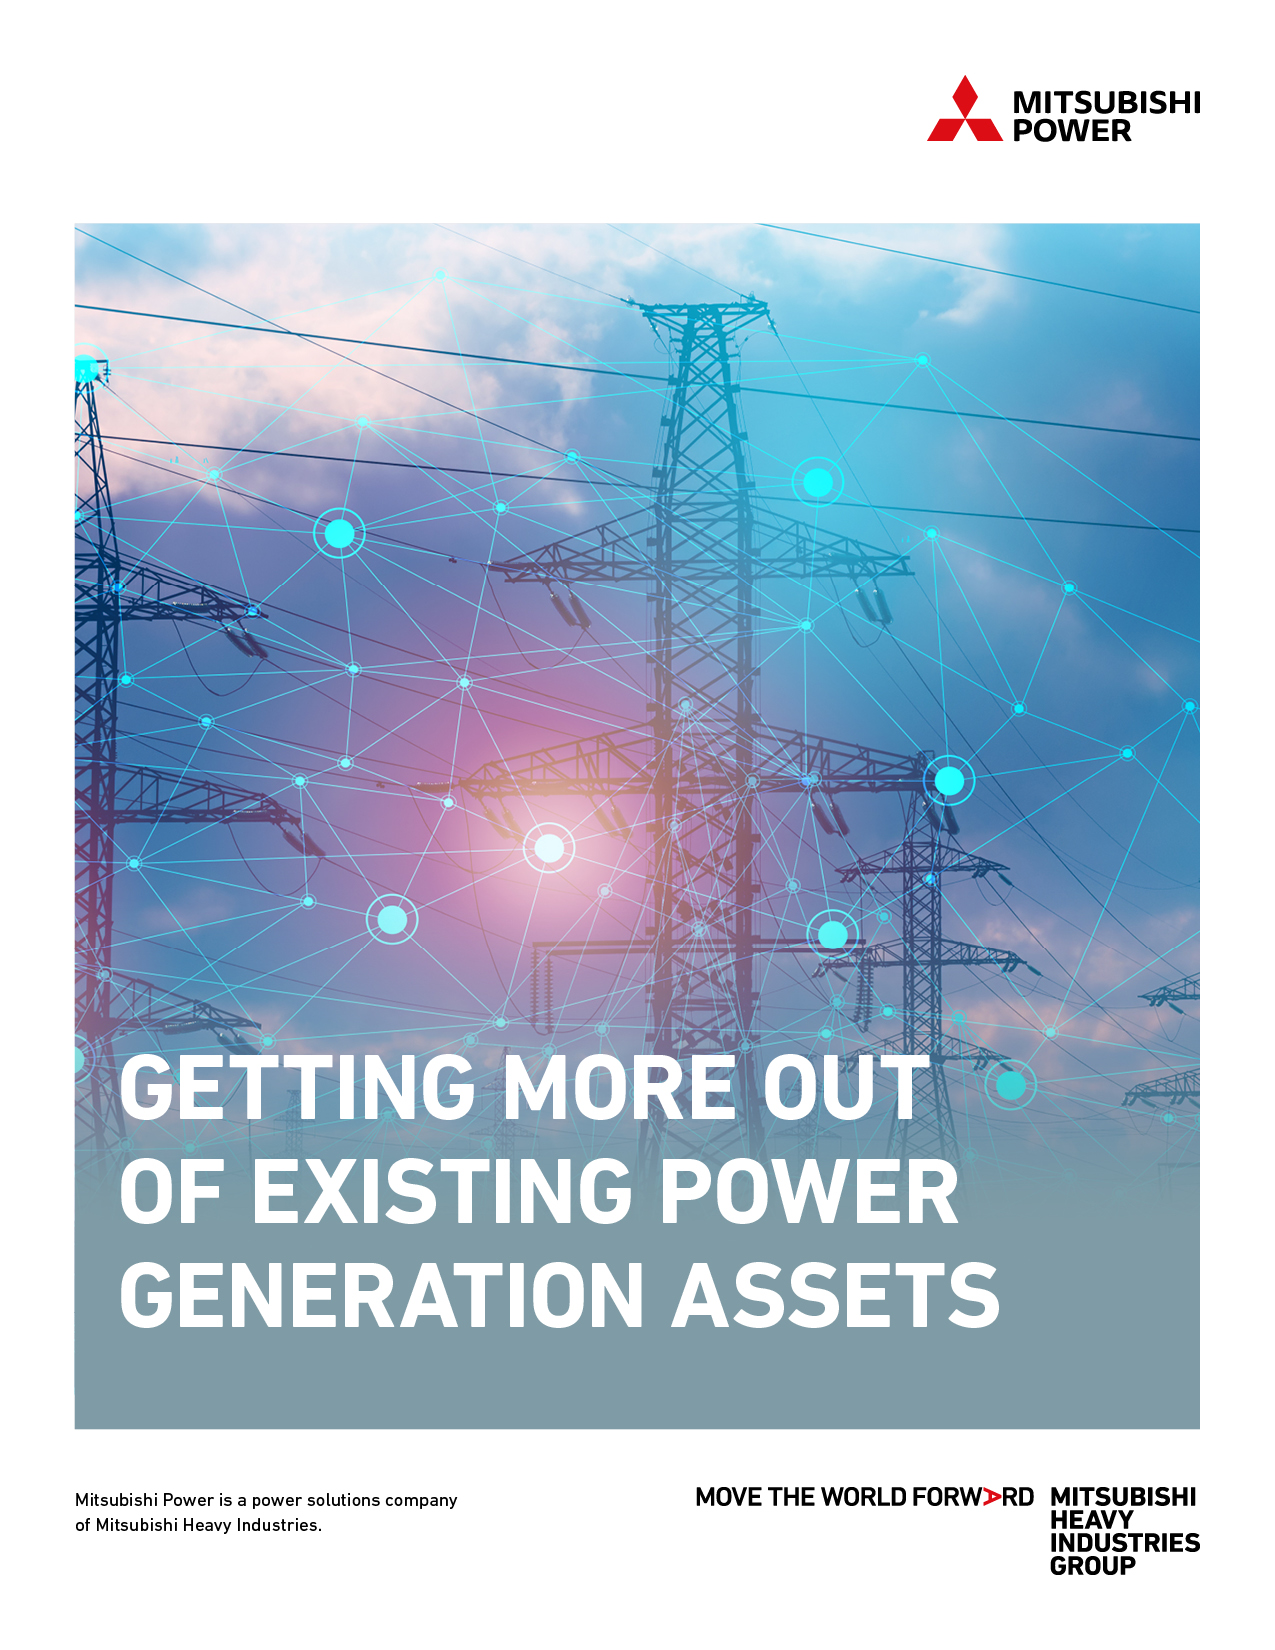 Mitsubishi Power White Paper - Getting More Out Of Existing Power Generation Assets